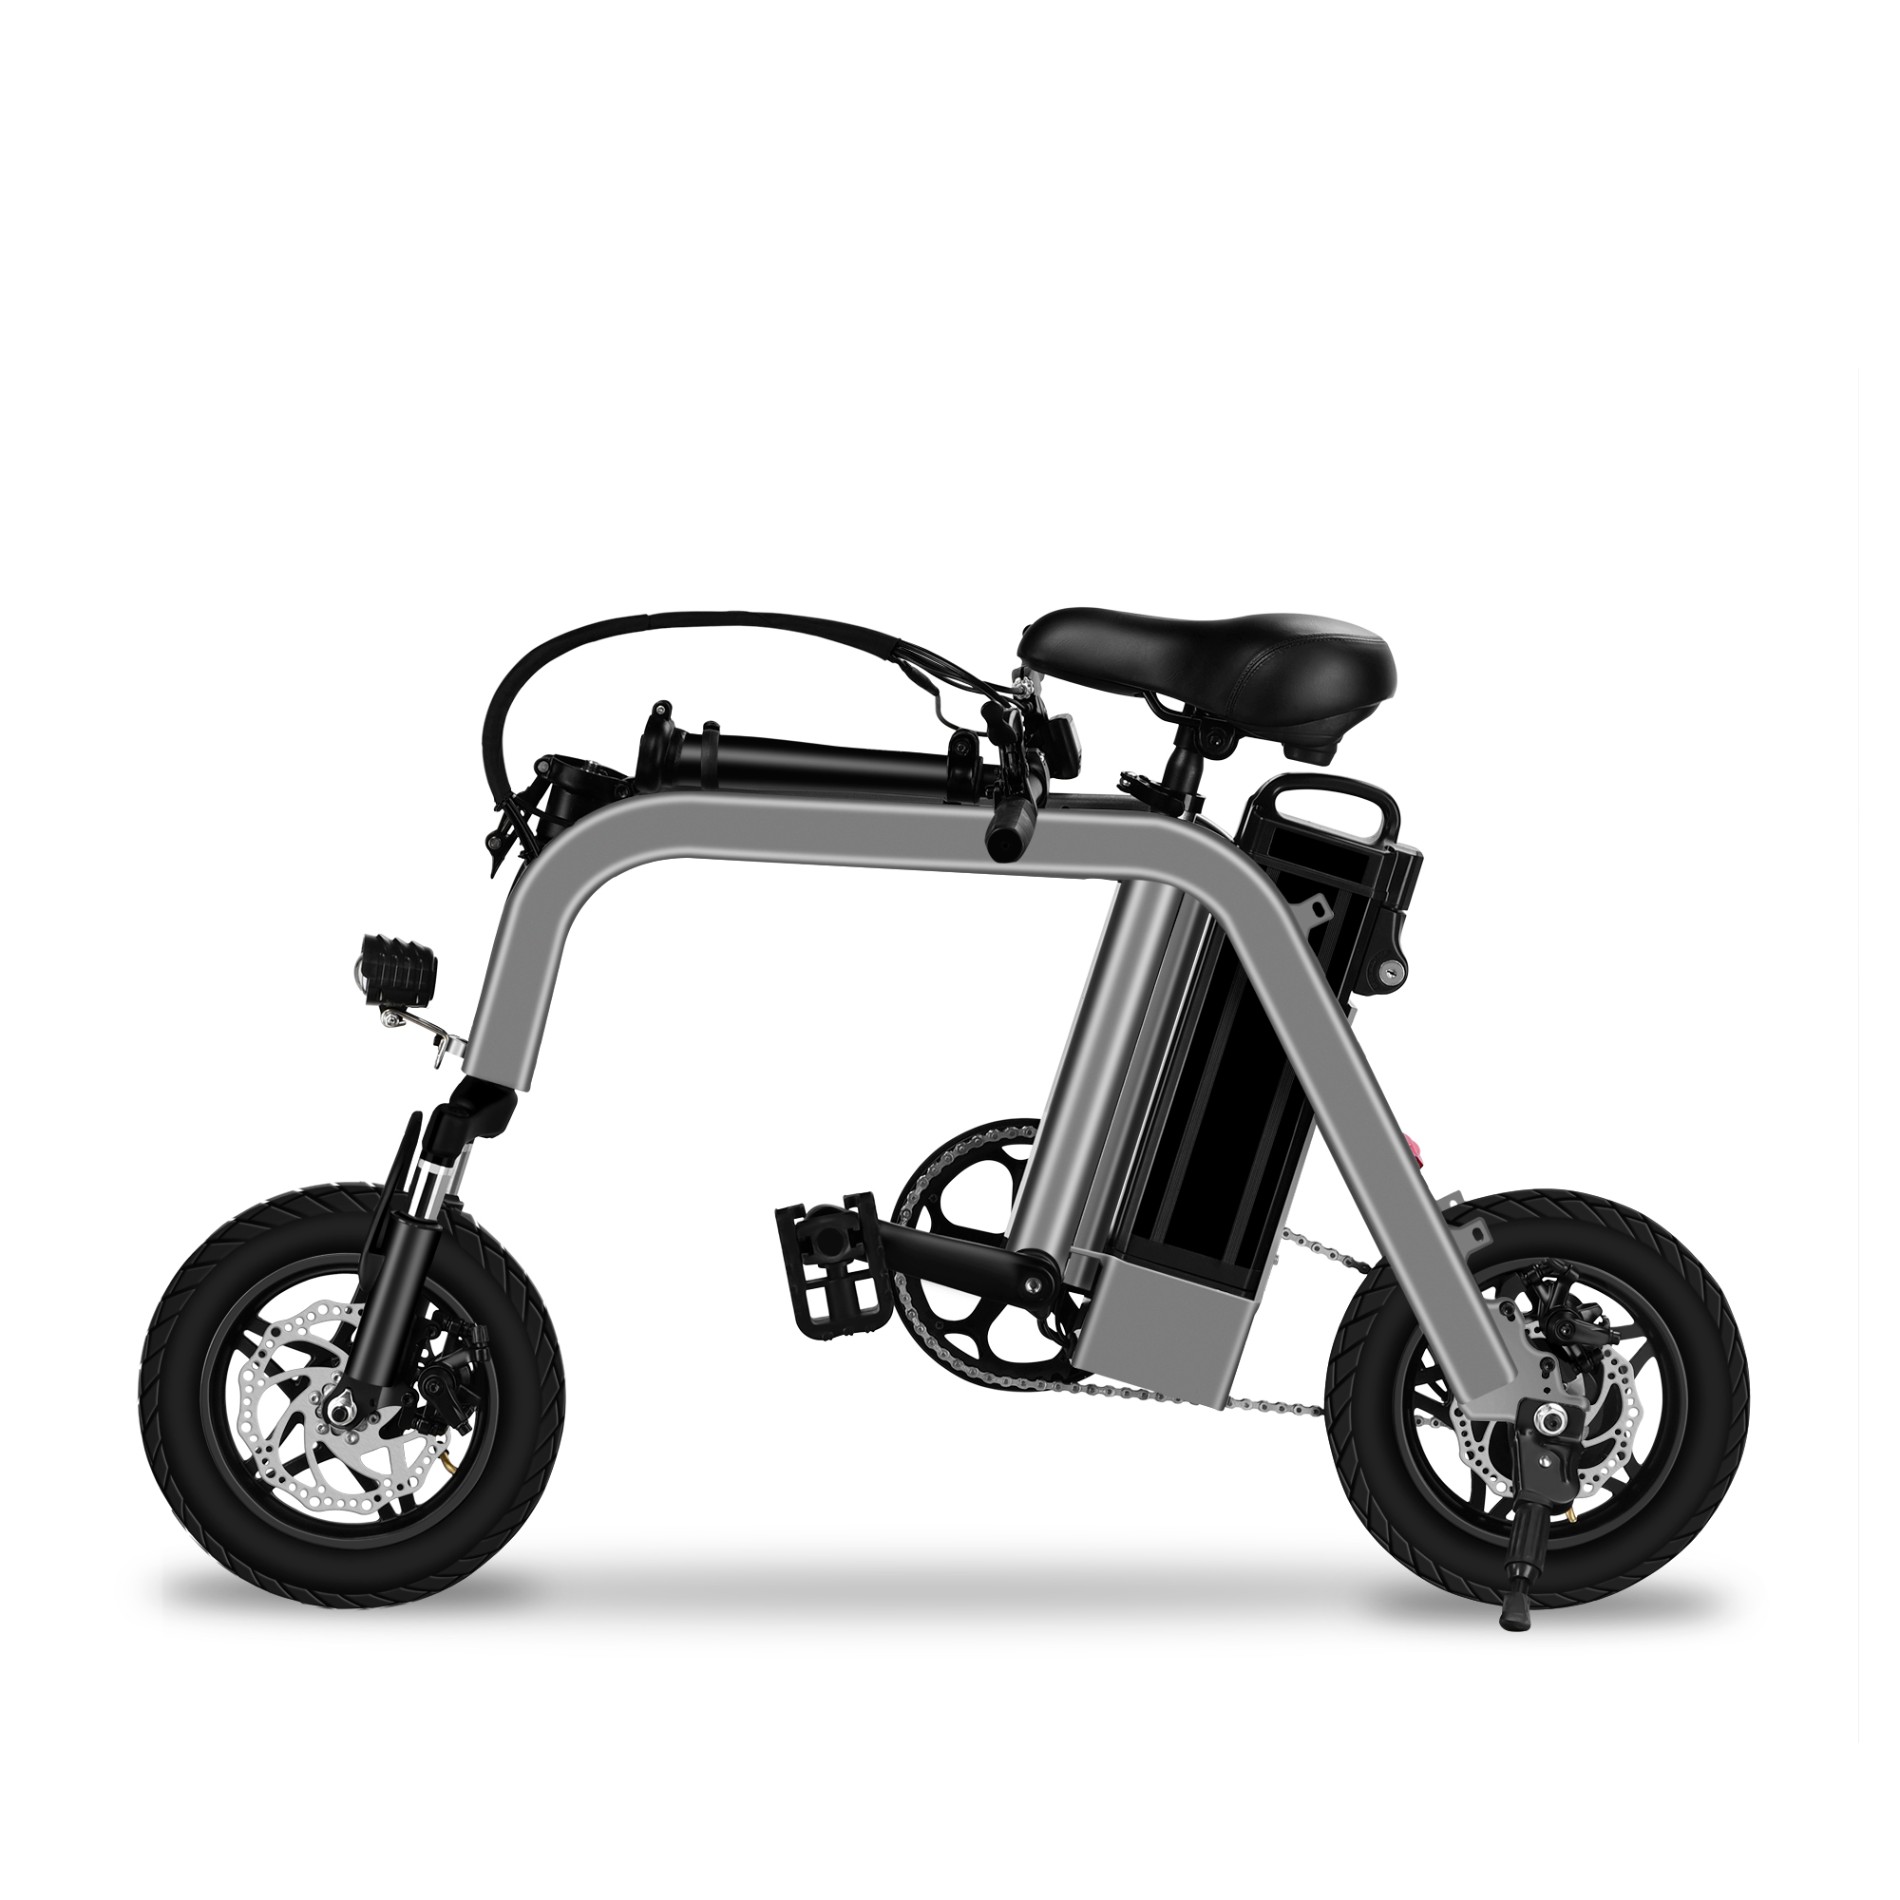 12 Inch The Hottest And Best Electric Bicycle With Foldable E-bike 36v Battery Removable Riding Manufacturers, 12 Inch The Hottest And Best Electric Bicycle With Foldable E-bike 36v Battery Removable Riding Factory, Supply 12 Inch The Hottest And Best Electric Bicycle With Foldable E-bike 36v Battery Removable Riding